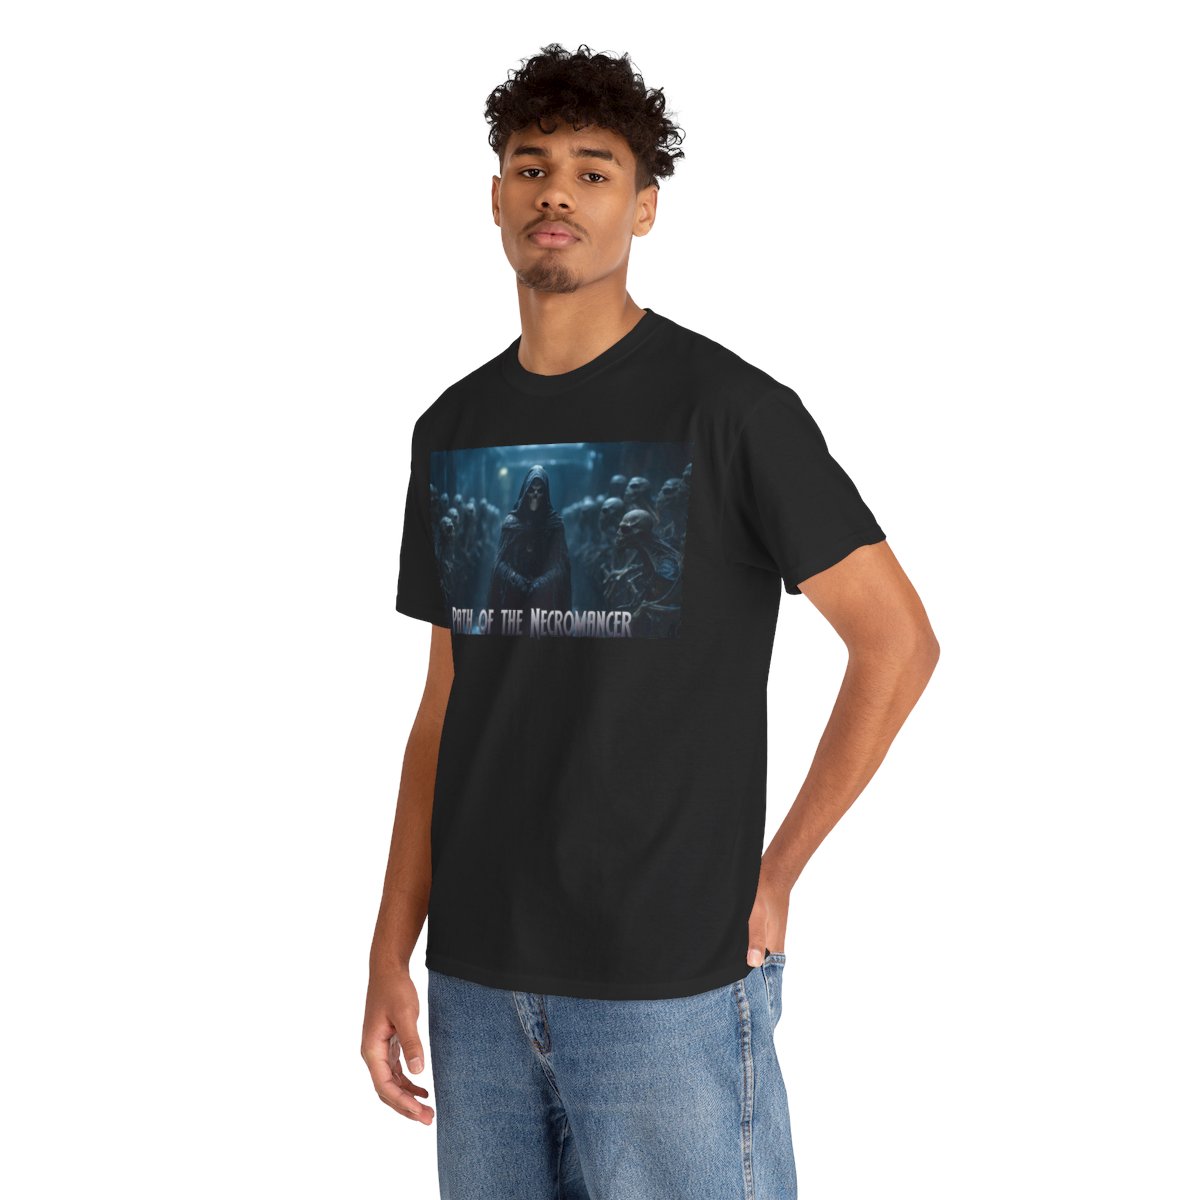 Path of the Necromancer Tee-Shirt  (Comes with free Game) product thumbnail image